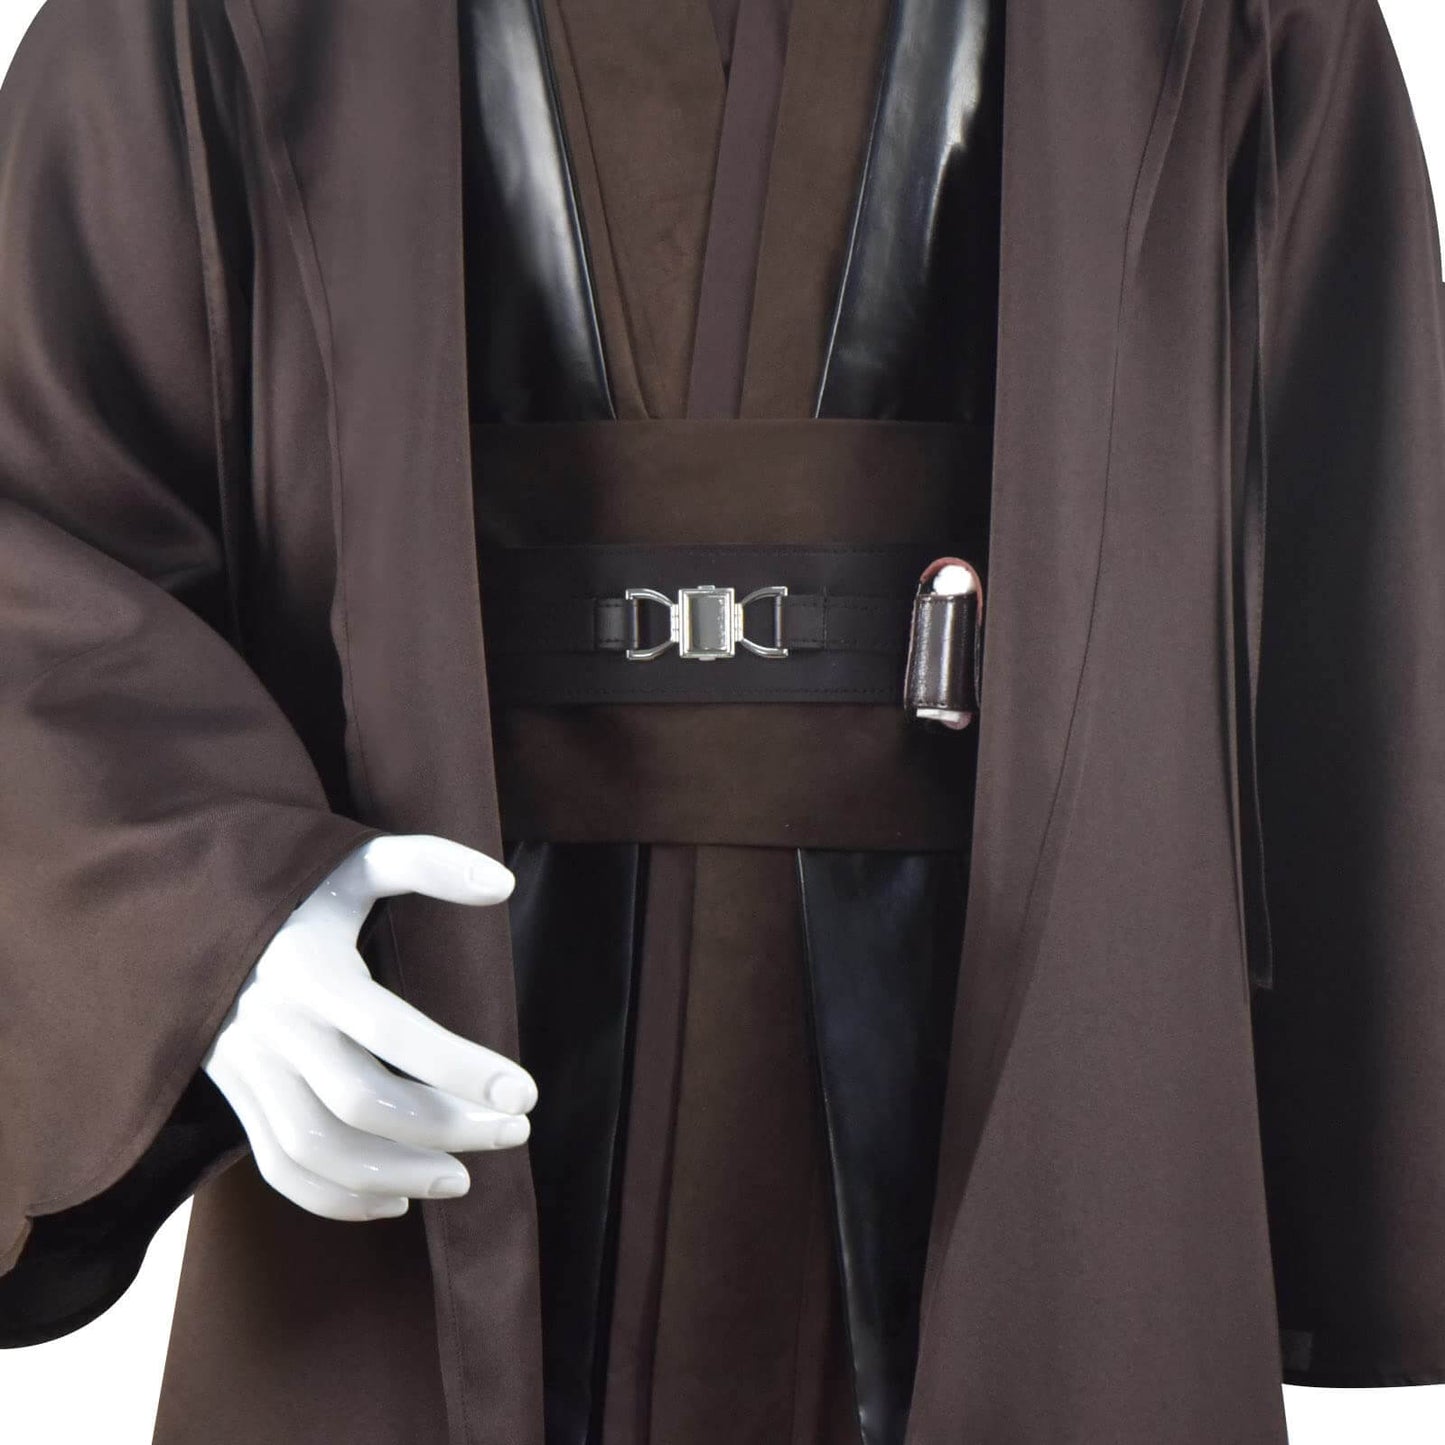 Anakin Skywalker Costume Adult Brown Jedi Hooded Robe Shirt Pants Full Set Outfits